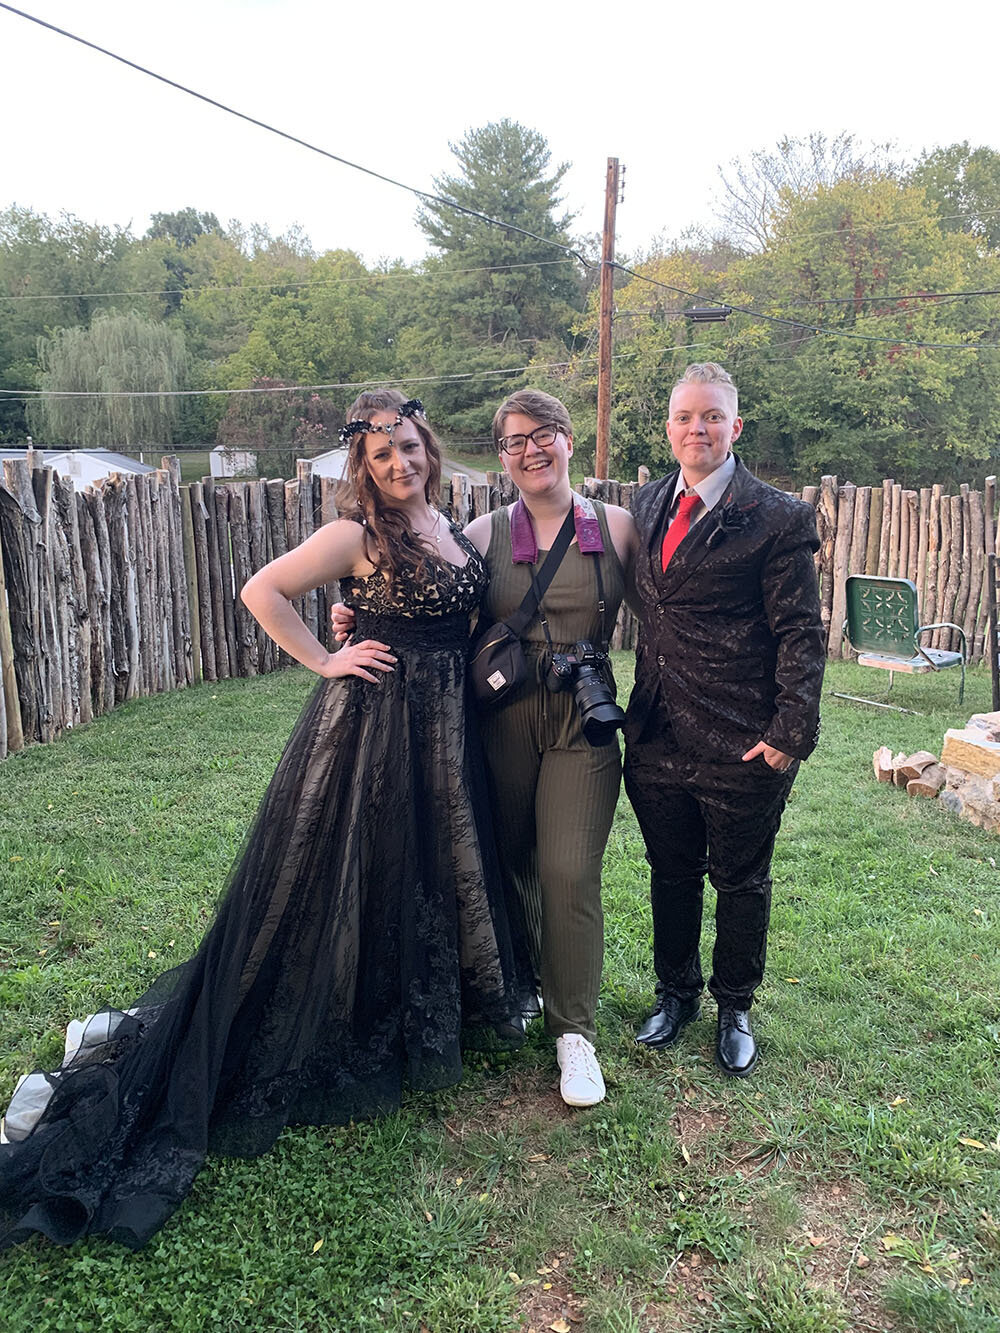 A Virginia wedding photographer stands with a queer couple on their wedding day in Roanoke, Virginia at an Airbnb that they rented for the day.